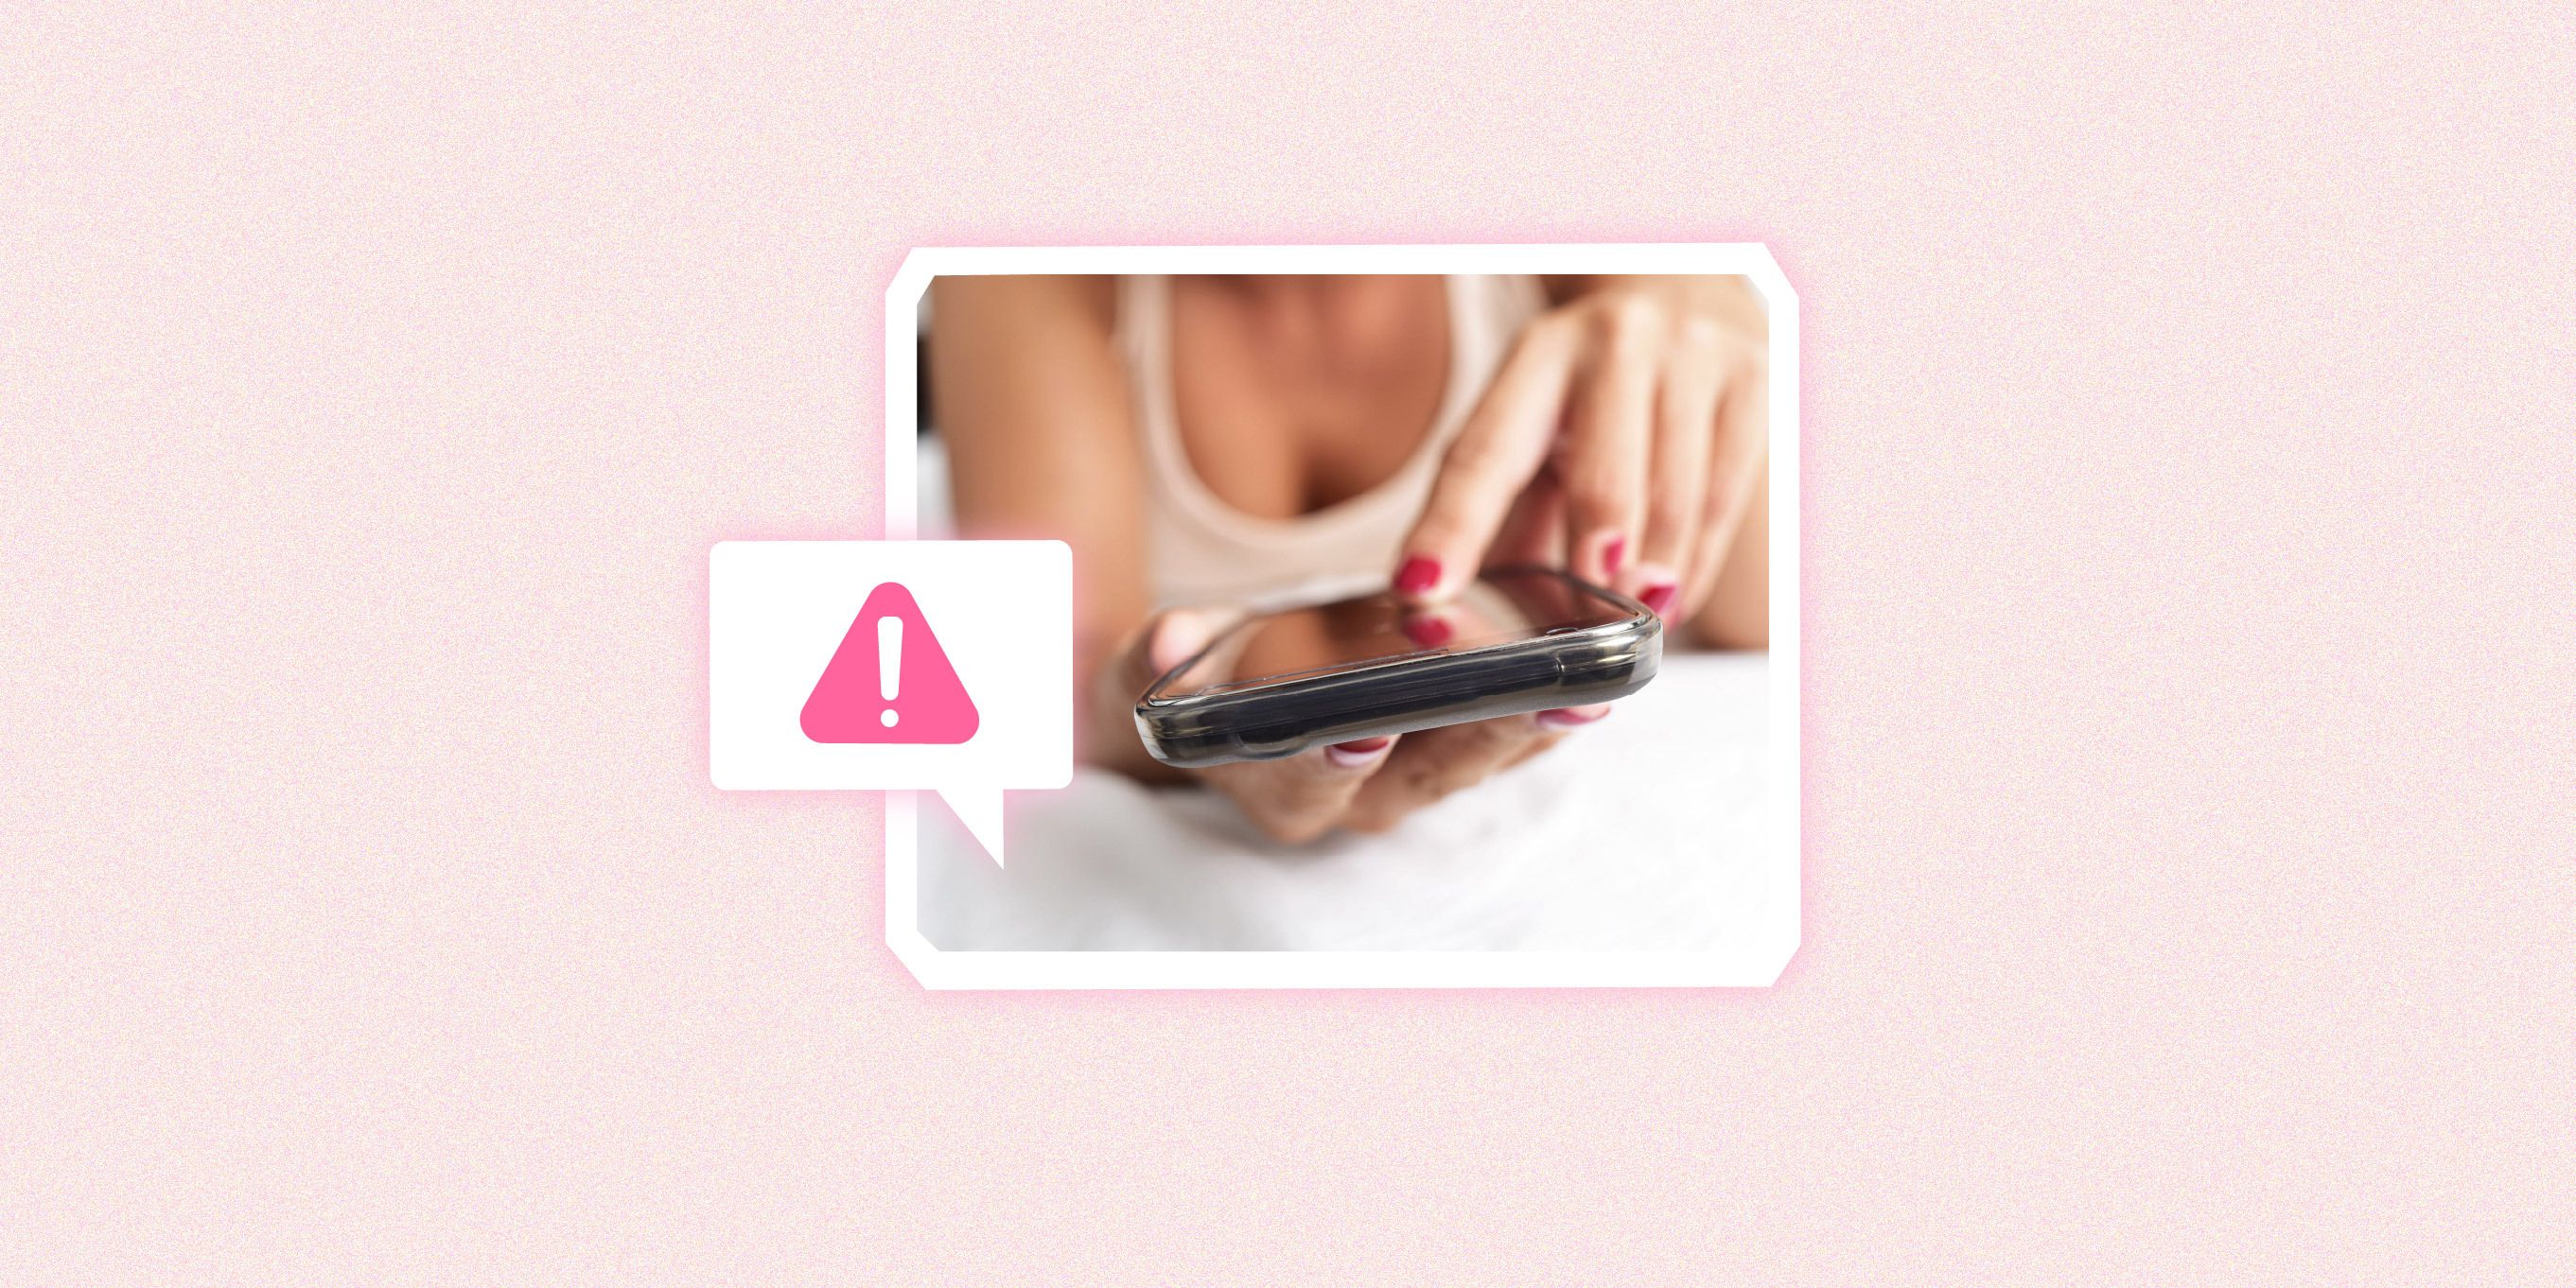 2723px x 1362px - Is It Illegal to Send Nudes? - What You Need to Know About Sending Nudes